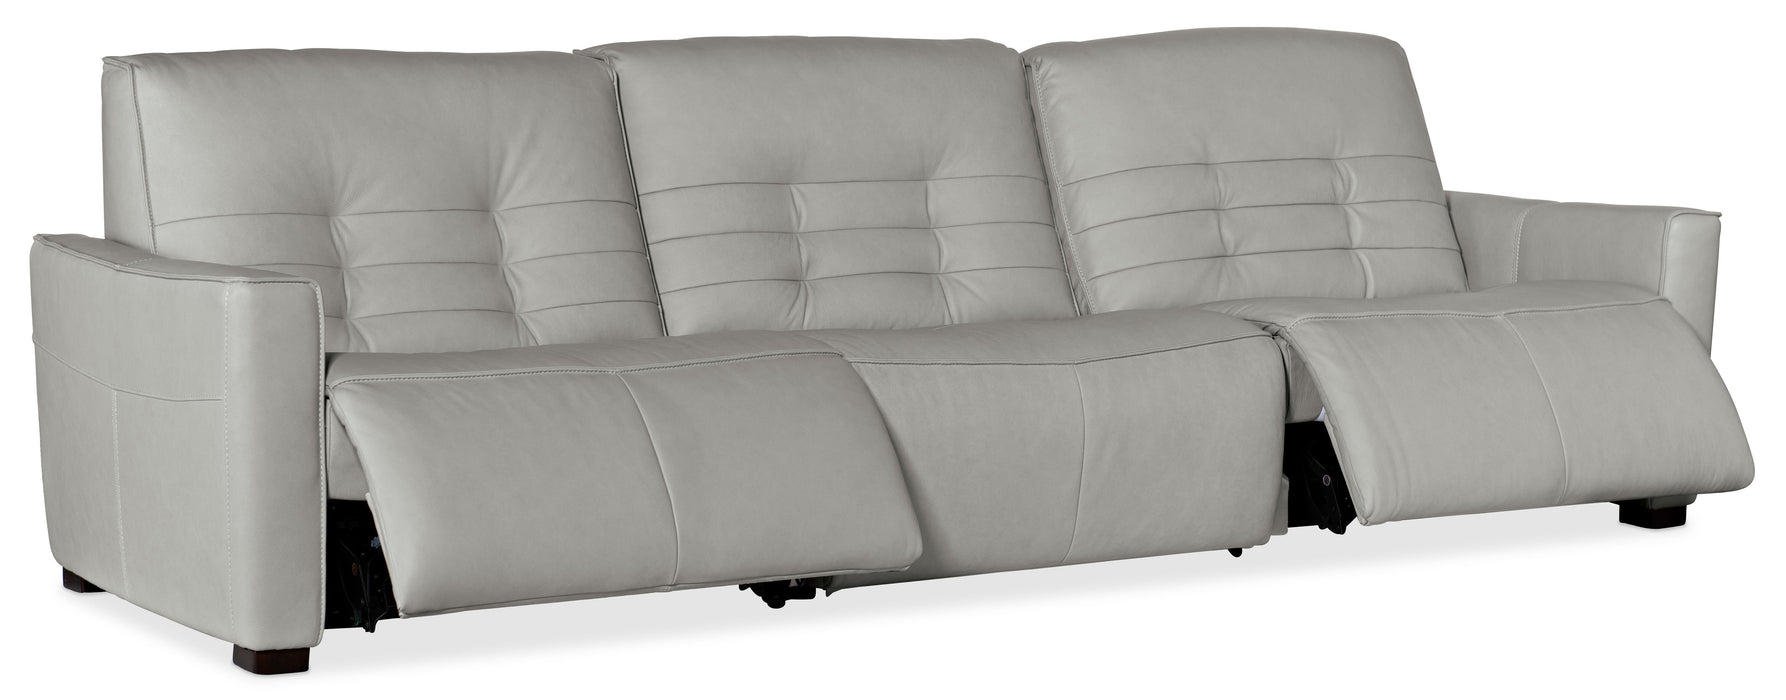 Reaux - Power Recline Sofa With Power Recliners